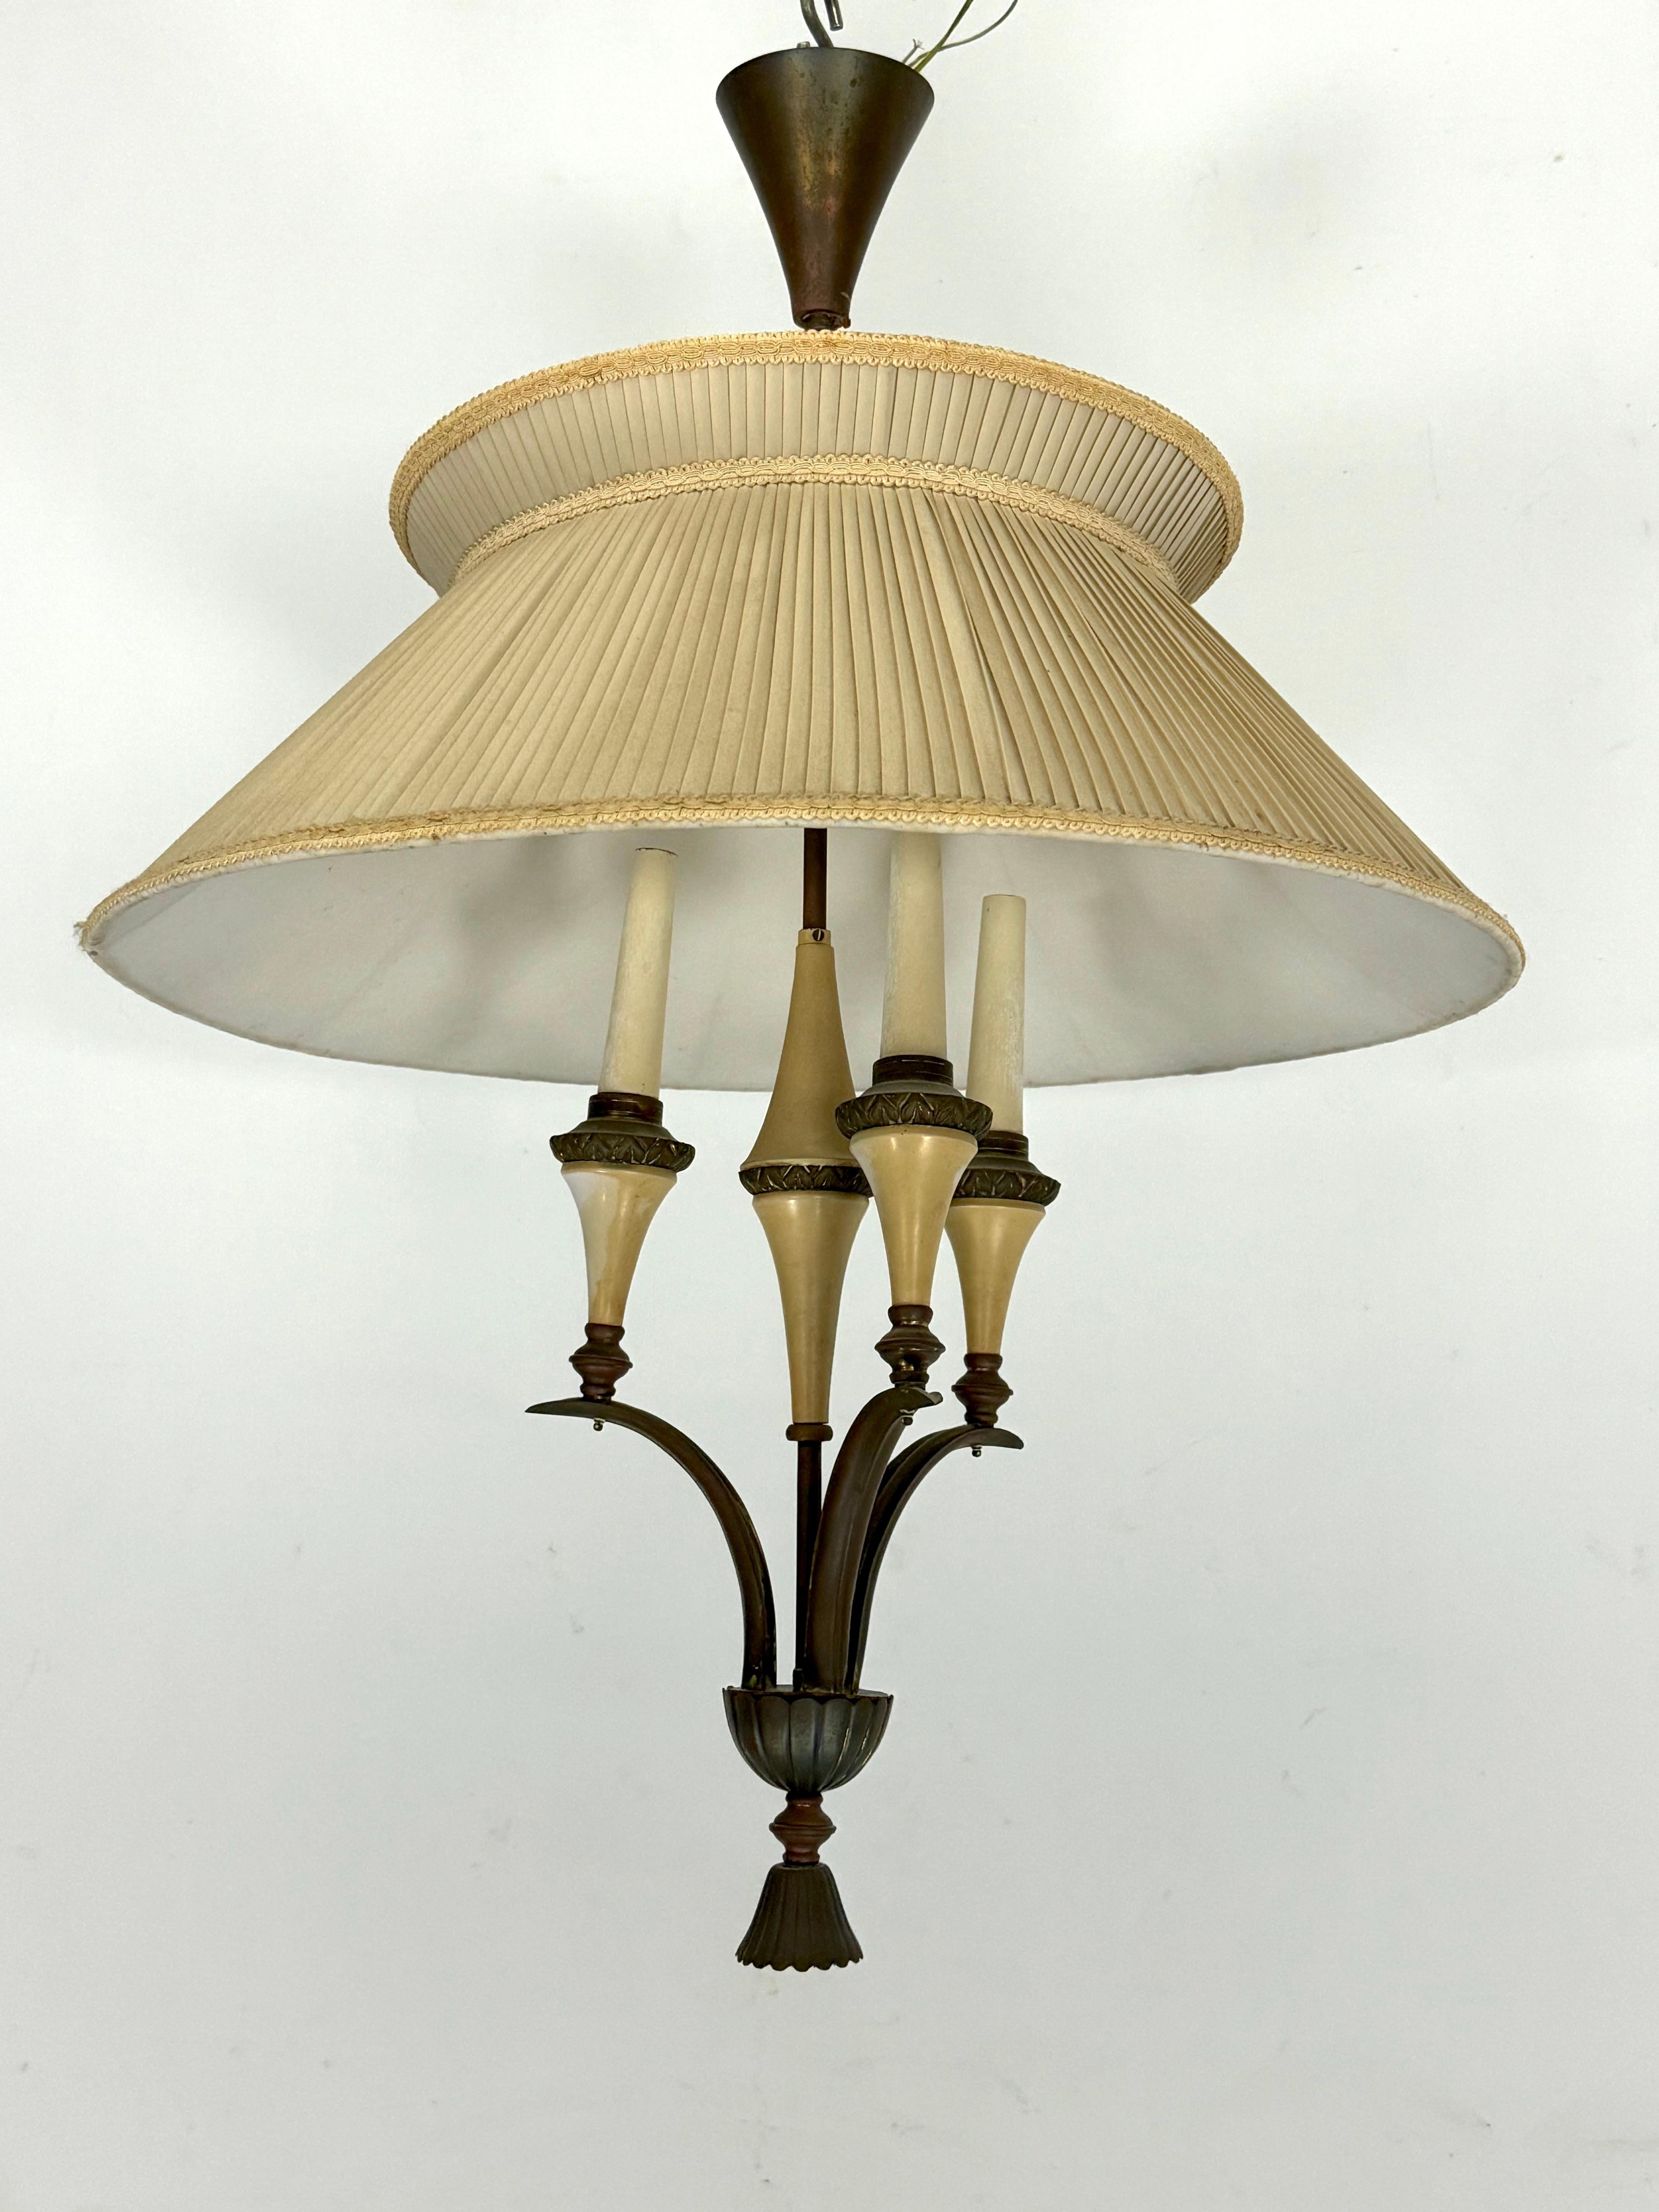 Good vintage condition with normal trace of age and use for this chandelier in brass with fabric shade. Original patina. Full working with EU standard, adaptable on demand for USA standard.